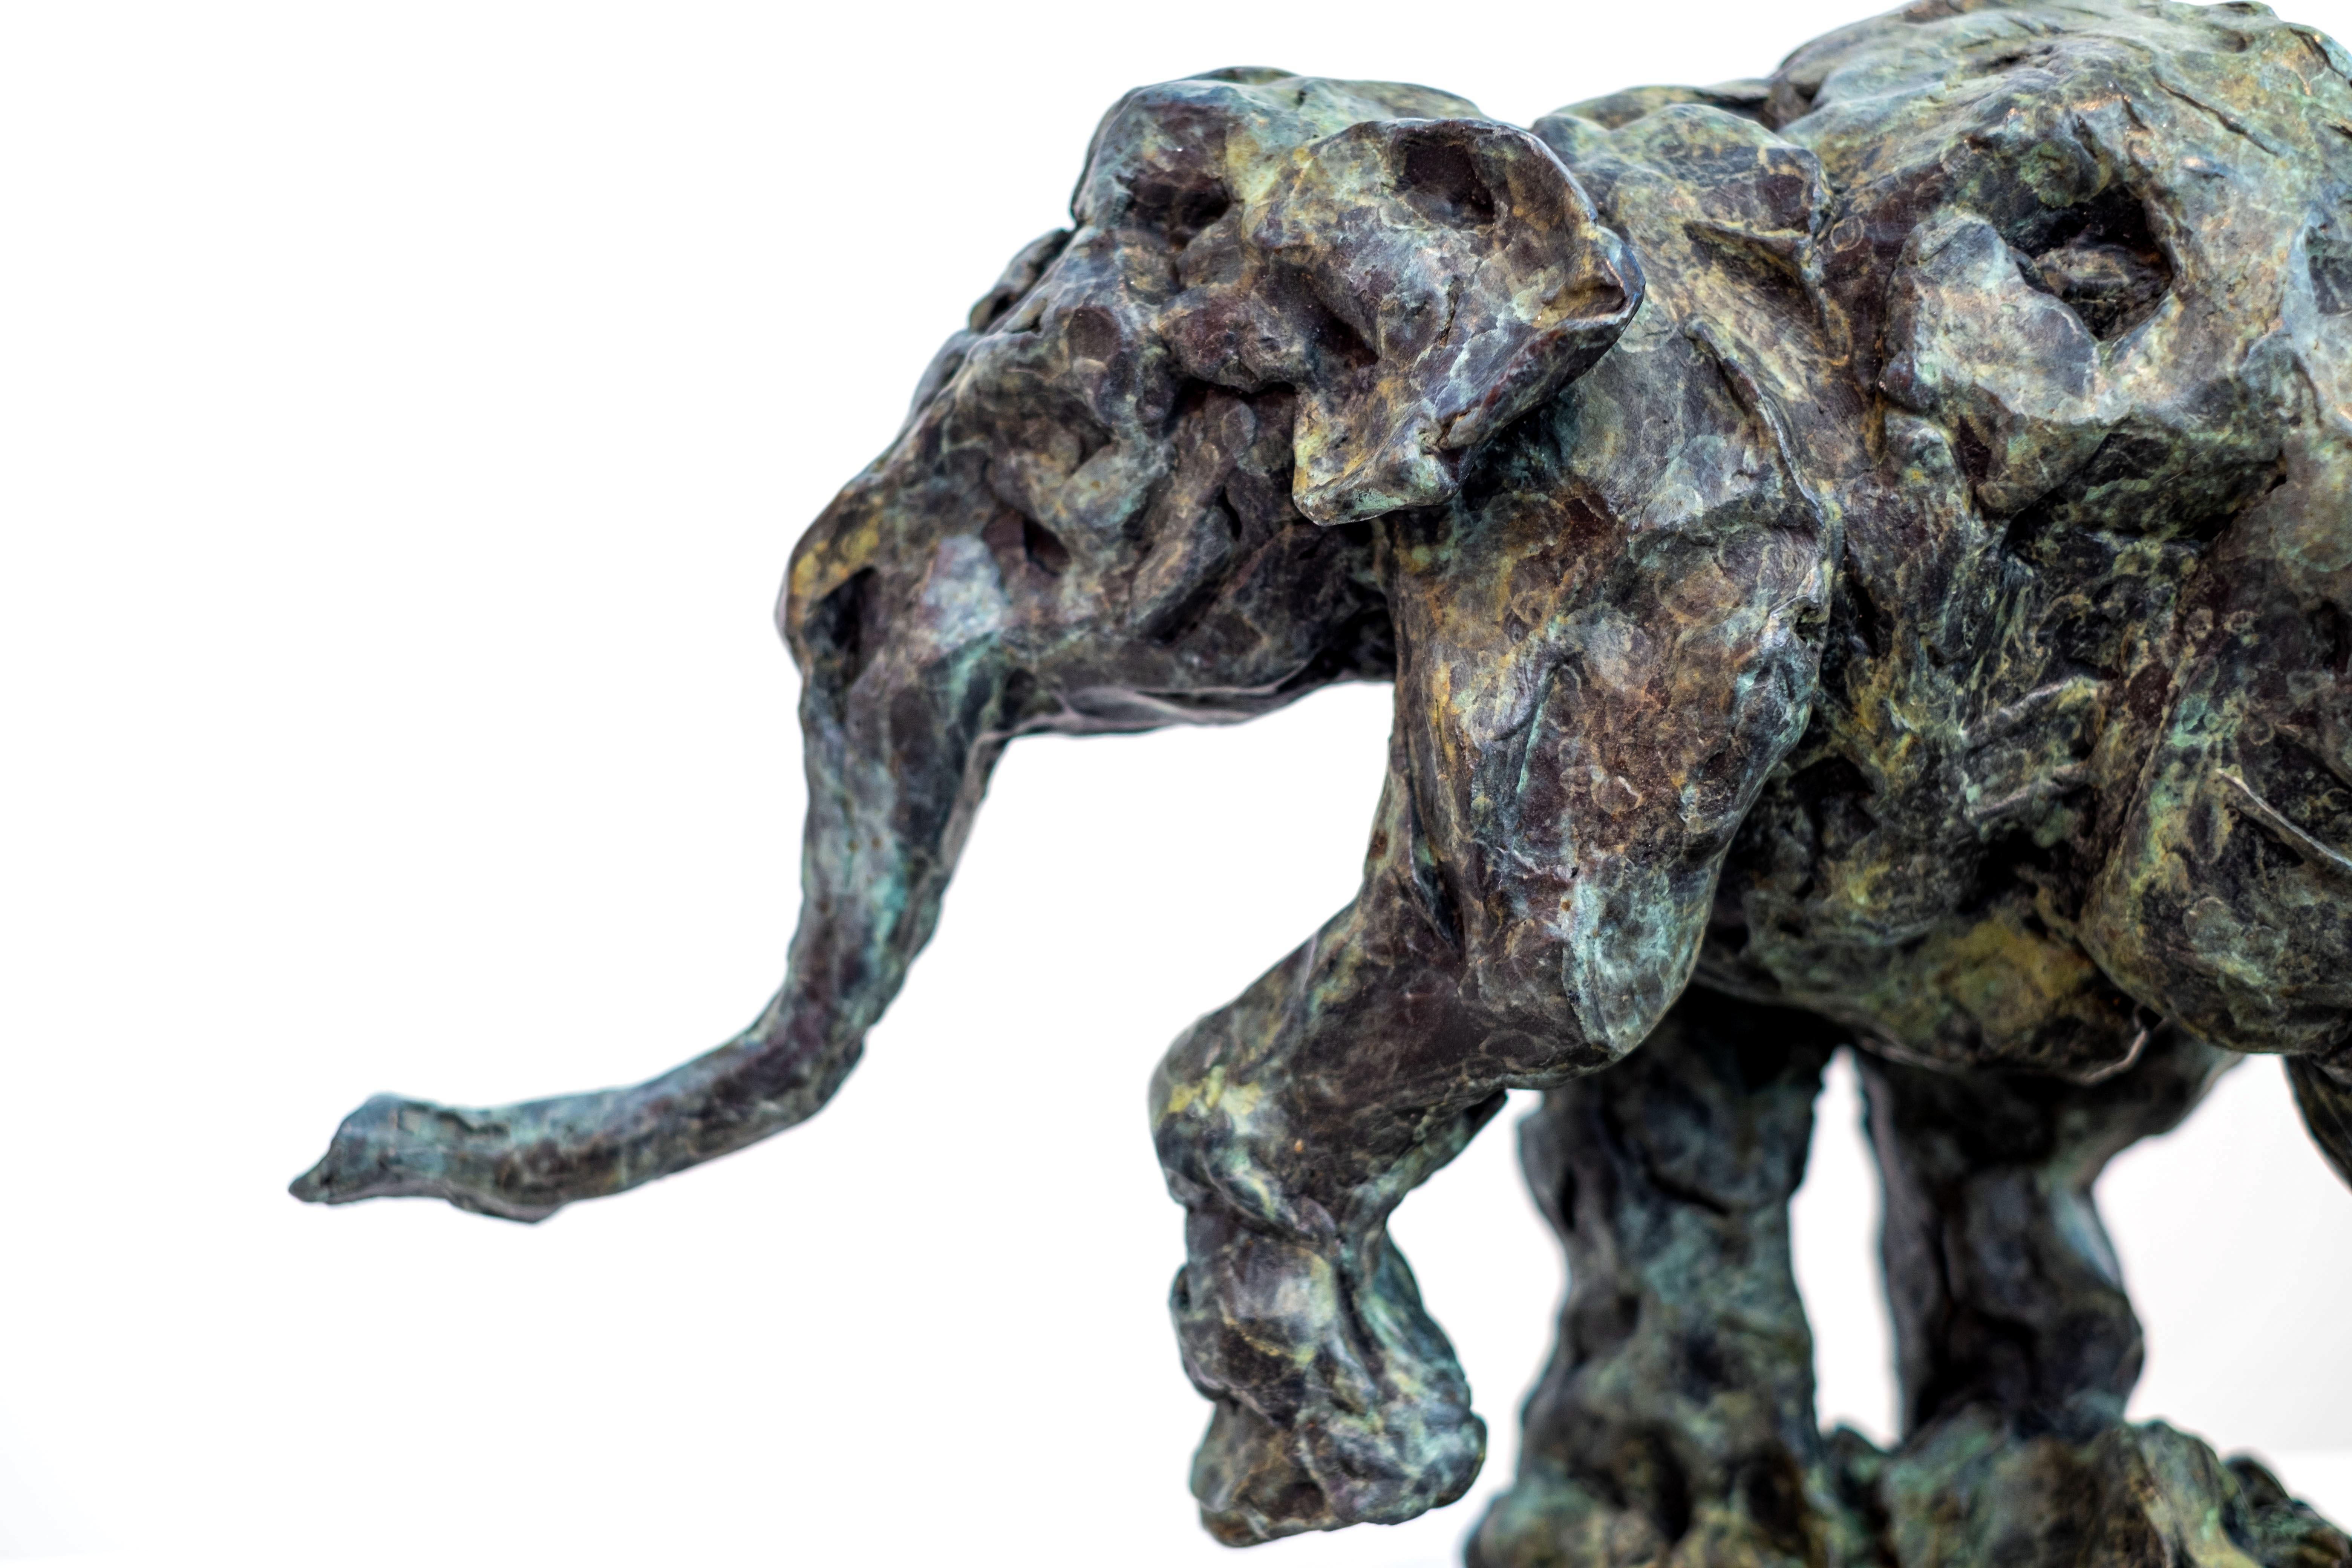  Elephant Dream - chasing tigers 3/8 - bronze table-top sculpture For Sale 3